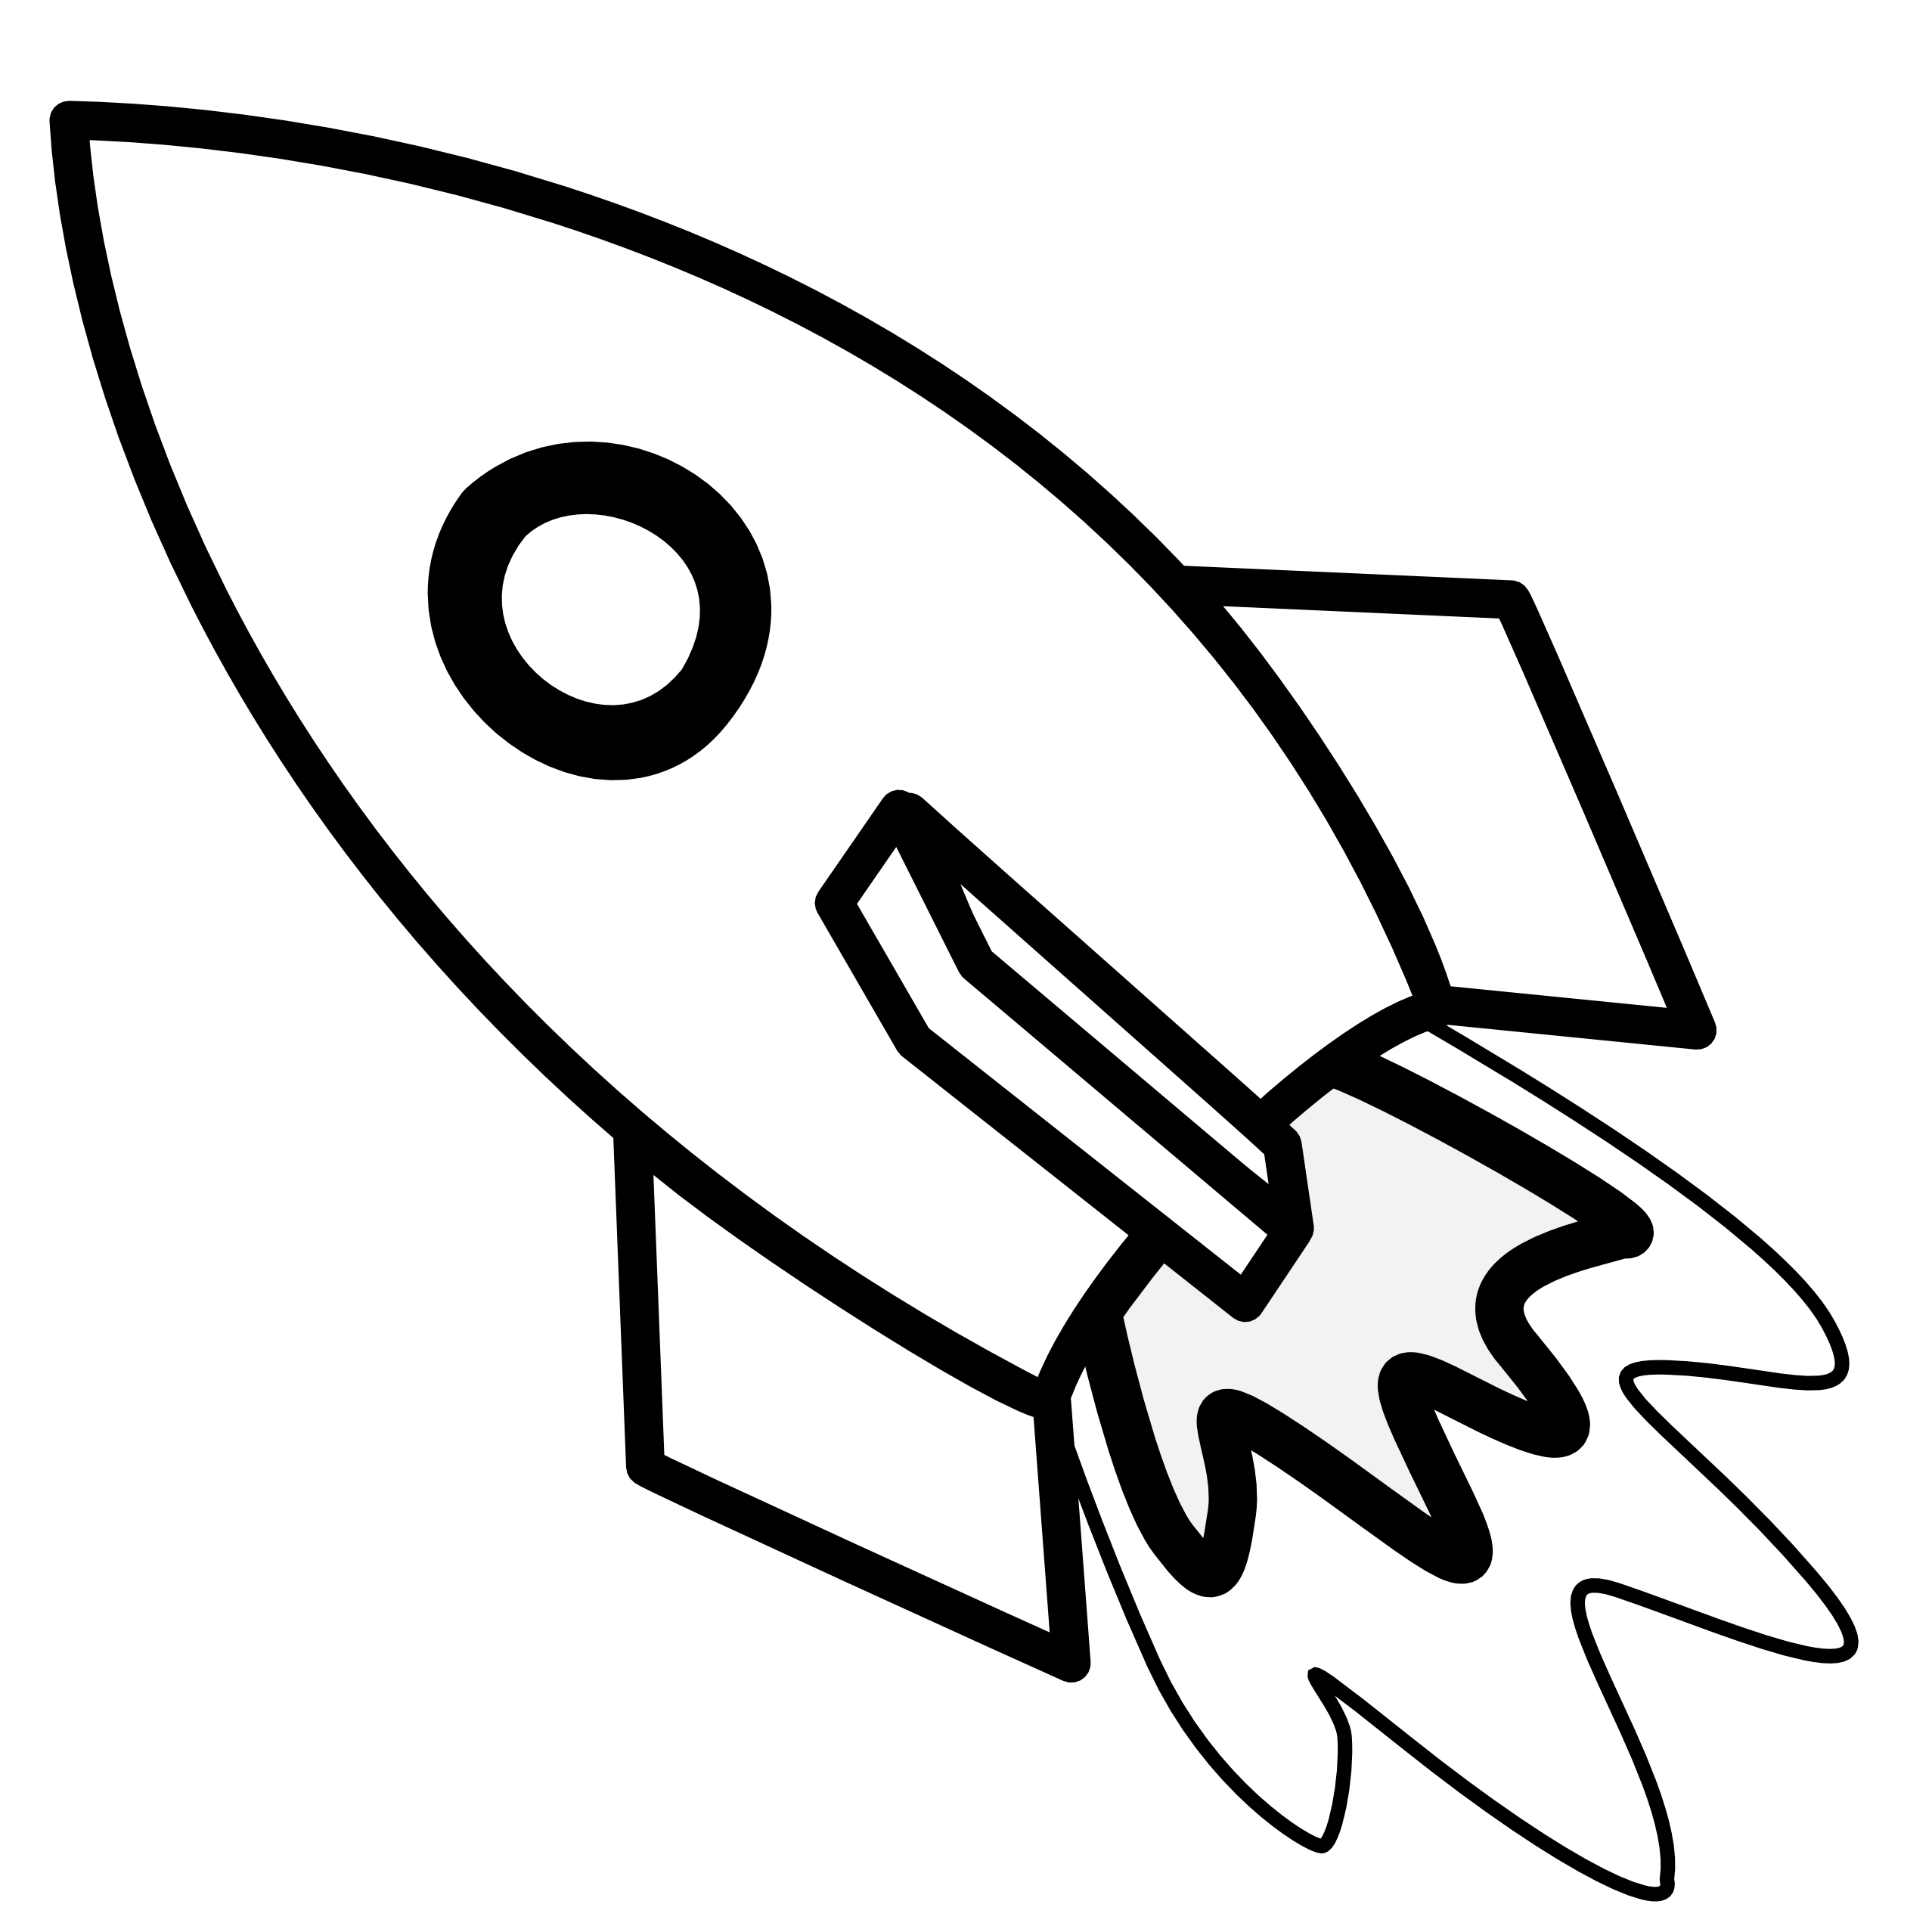 Toy clipart line art. Rocket black and white